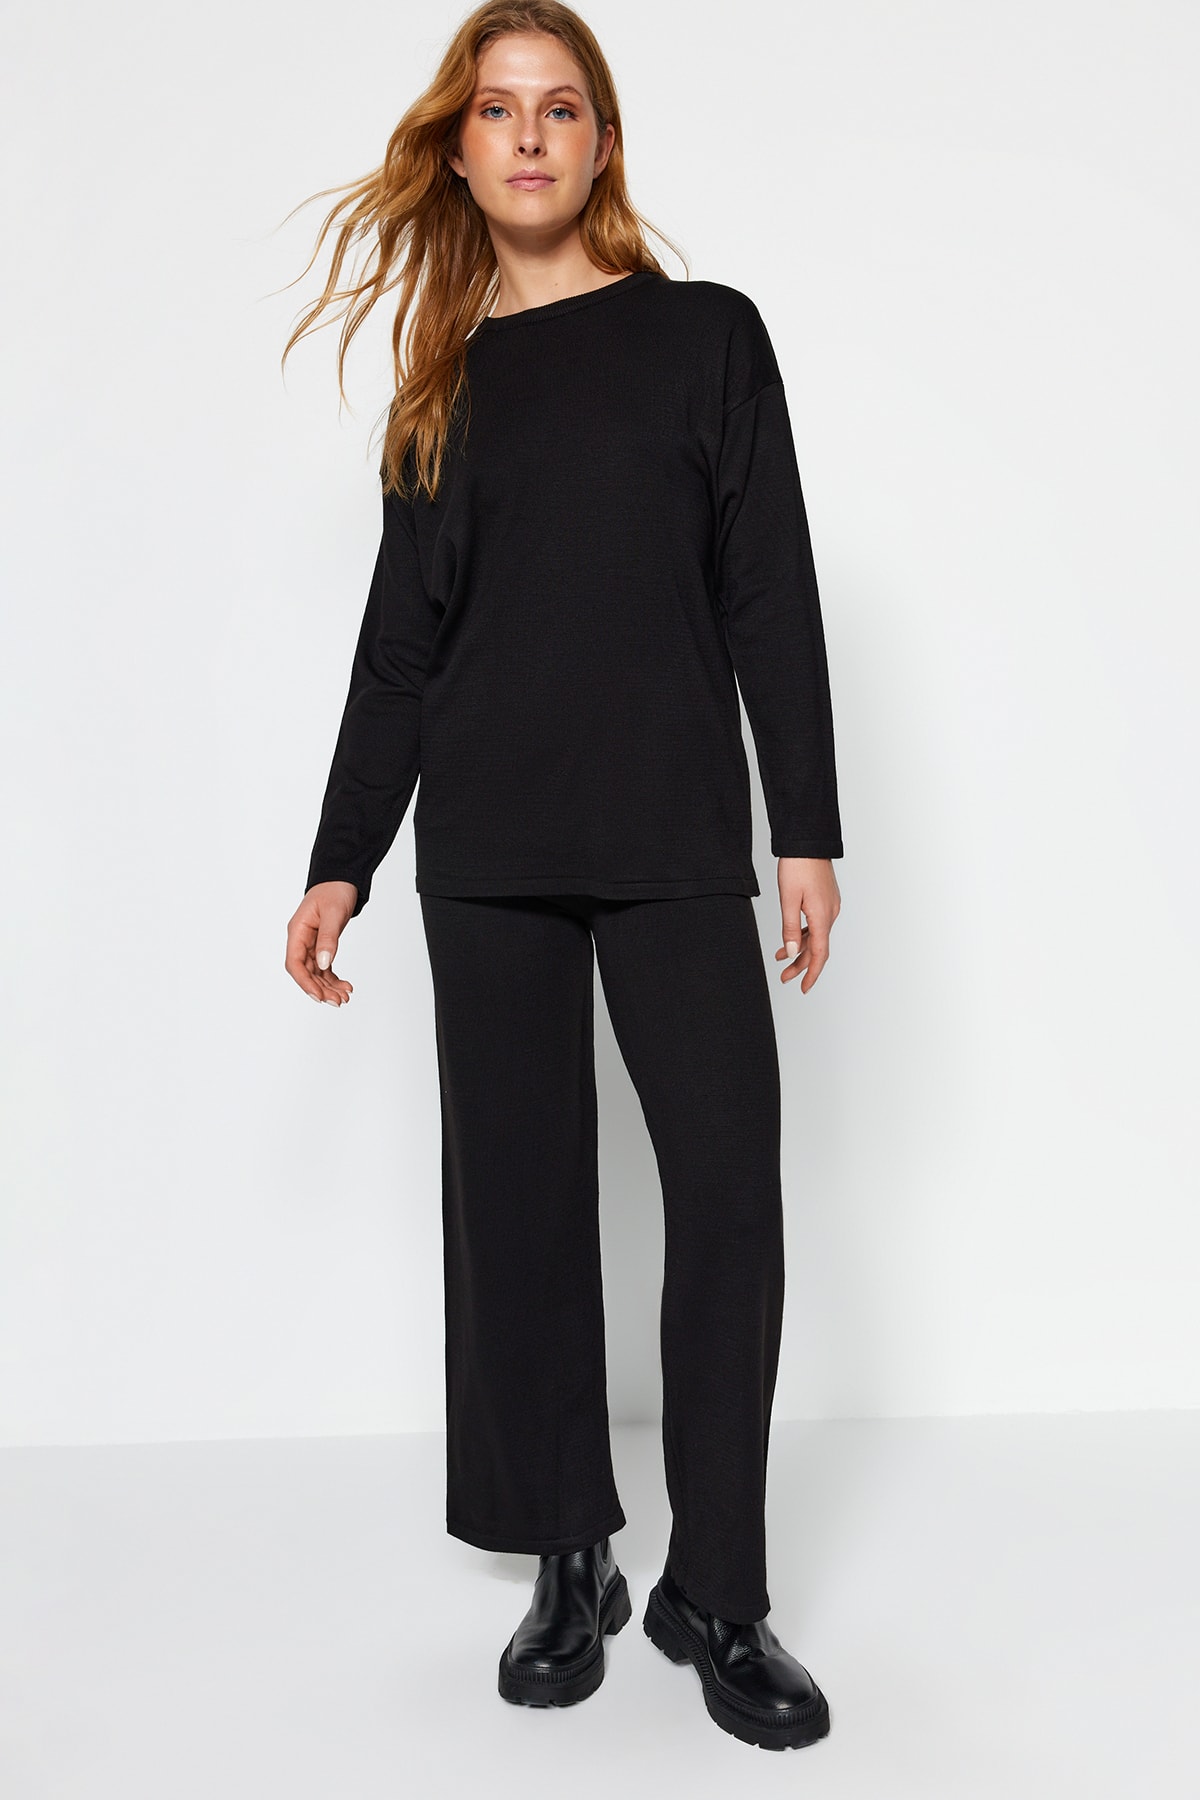 Trendyol Black Basic Knitwear Top-Upper Suit with Crew-neck Pants and Trousers